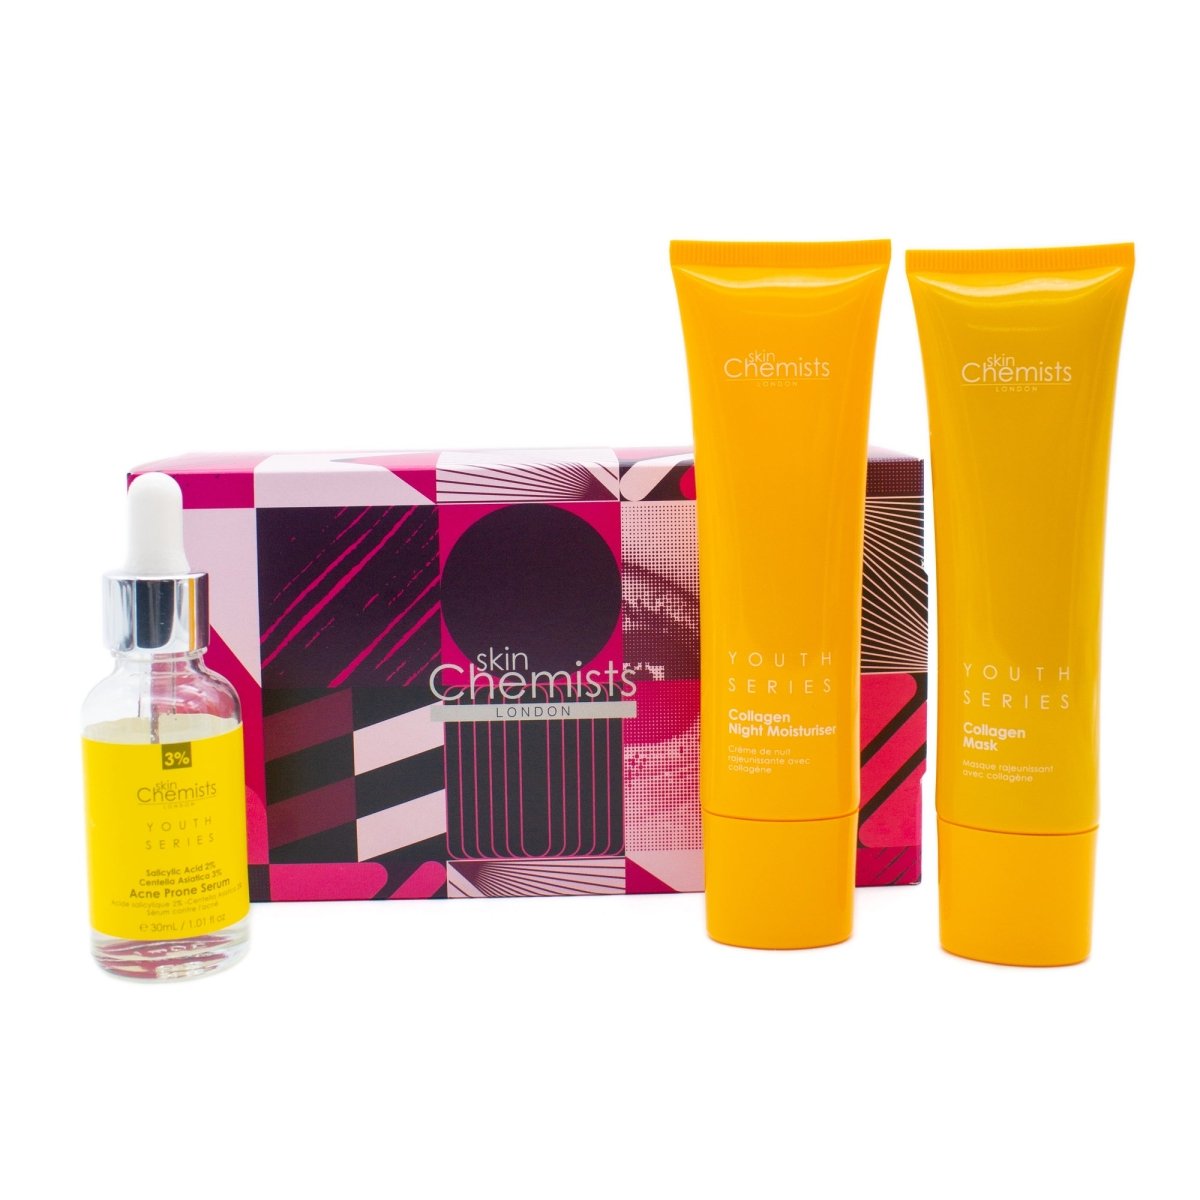 Youth Series Collagen Acne Prone Gift Set - skinChemists